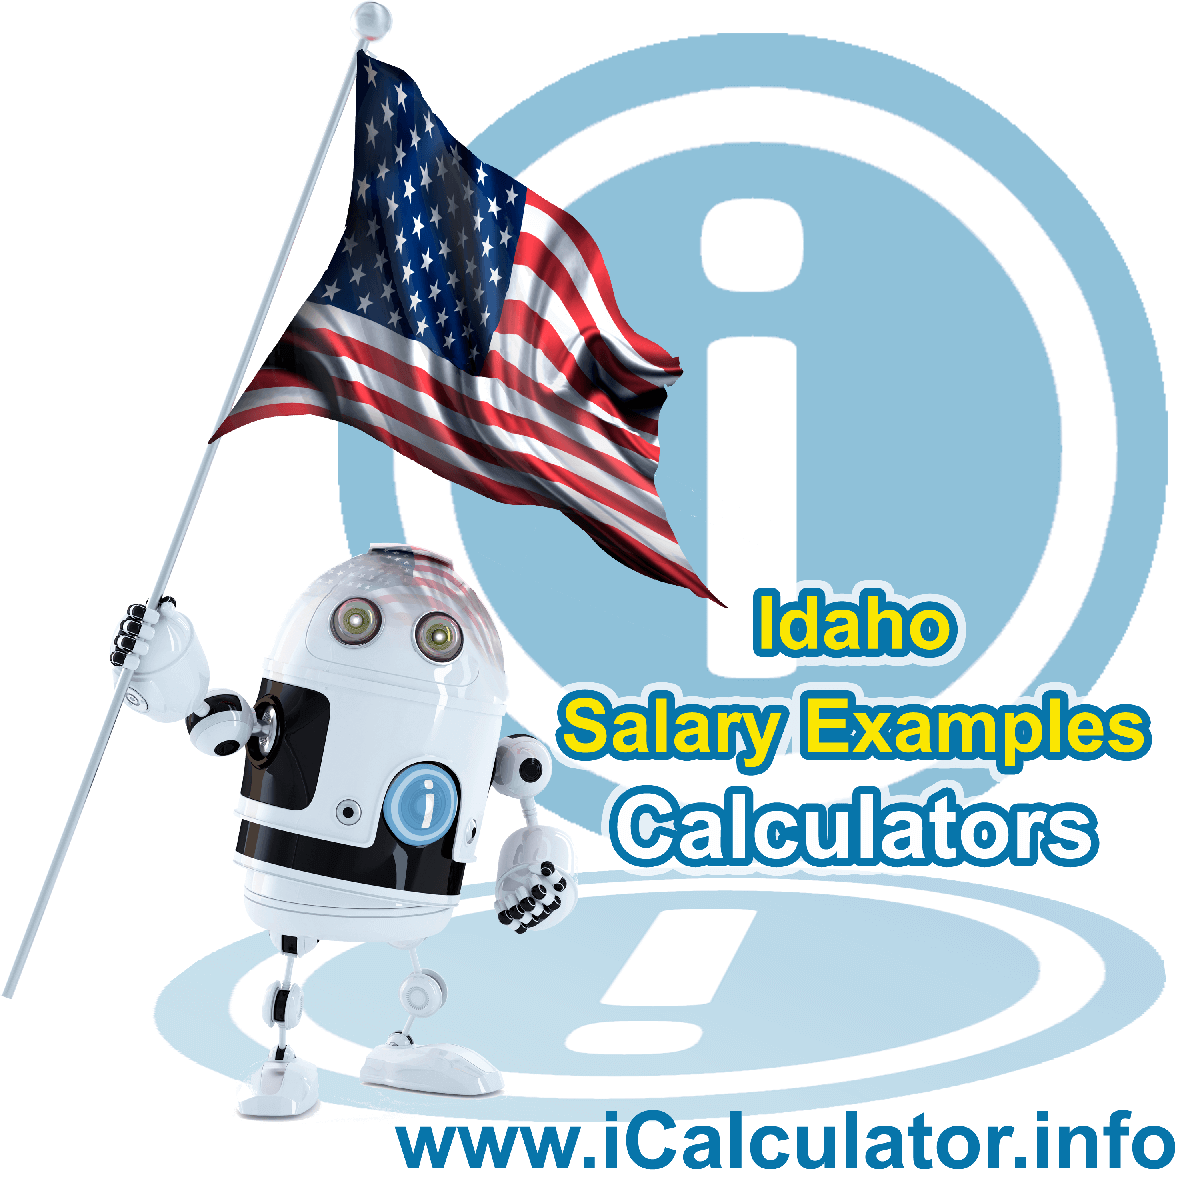 Idaho Salary Example for $20,000.00 in 2022 | iCalculator™ | $20,000.00 salary example for employee and employer paying Idaho State tincome taxes. Detailed salary after tax calculation including Idaho State Tax, Federal State Tax, Medicare Deductions, Social Security, Capital Gains and other income tax and salary deductions complete with supporting Idaho state tax tables 